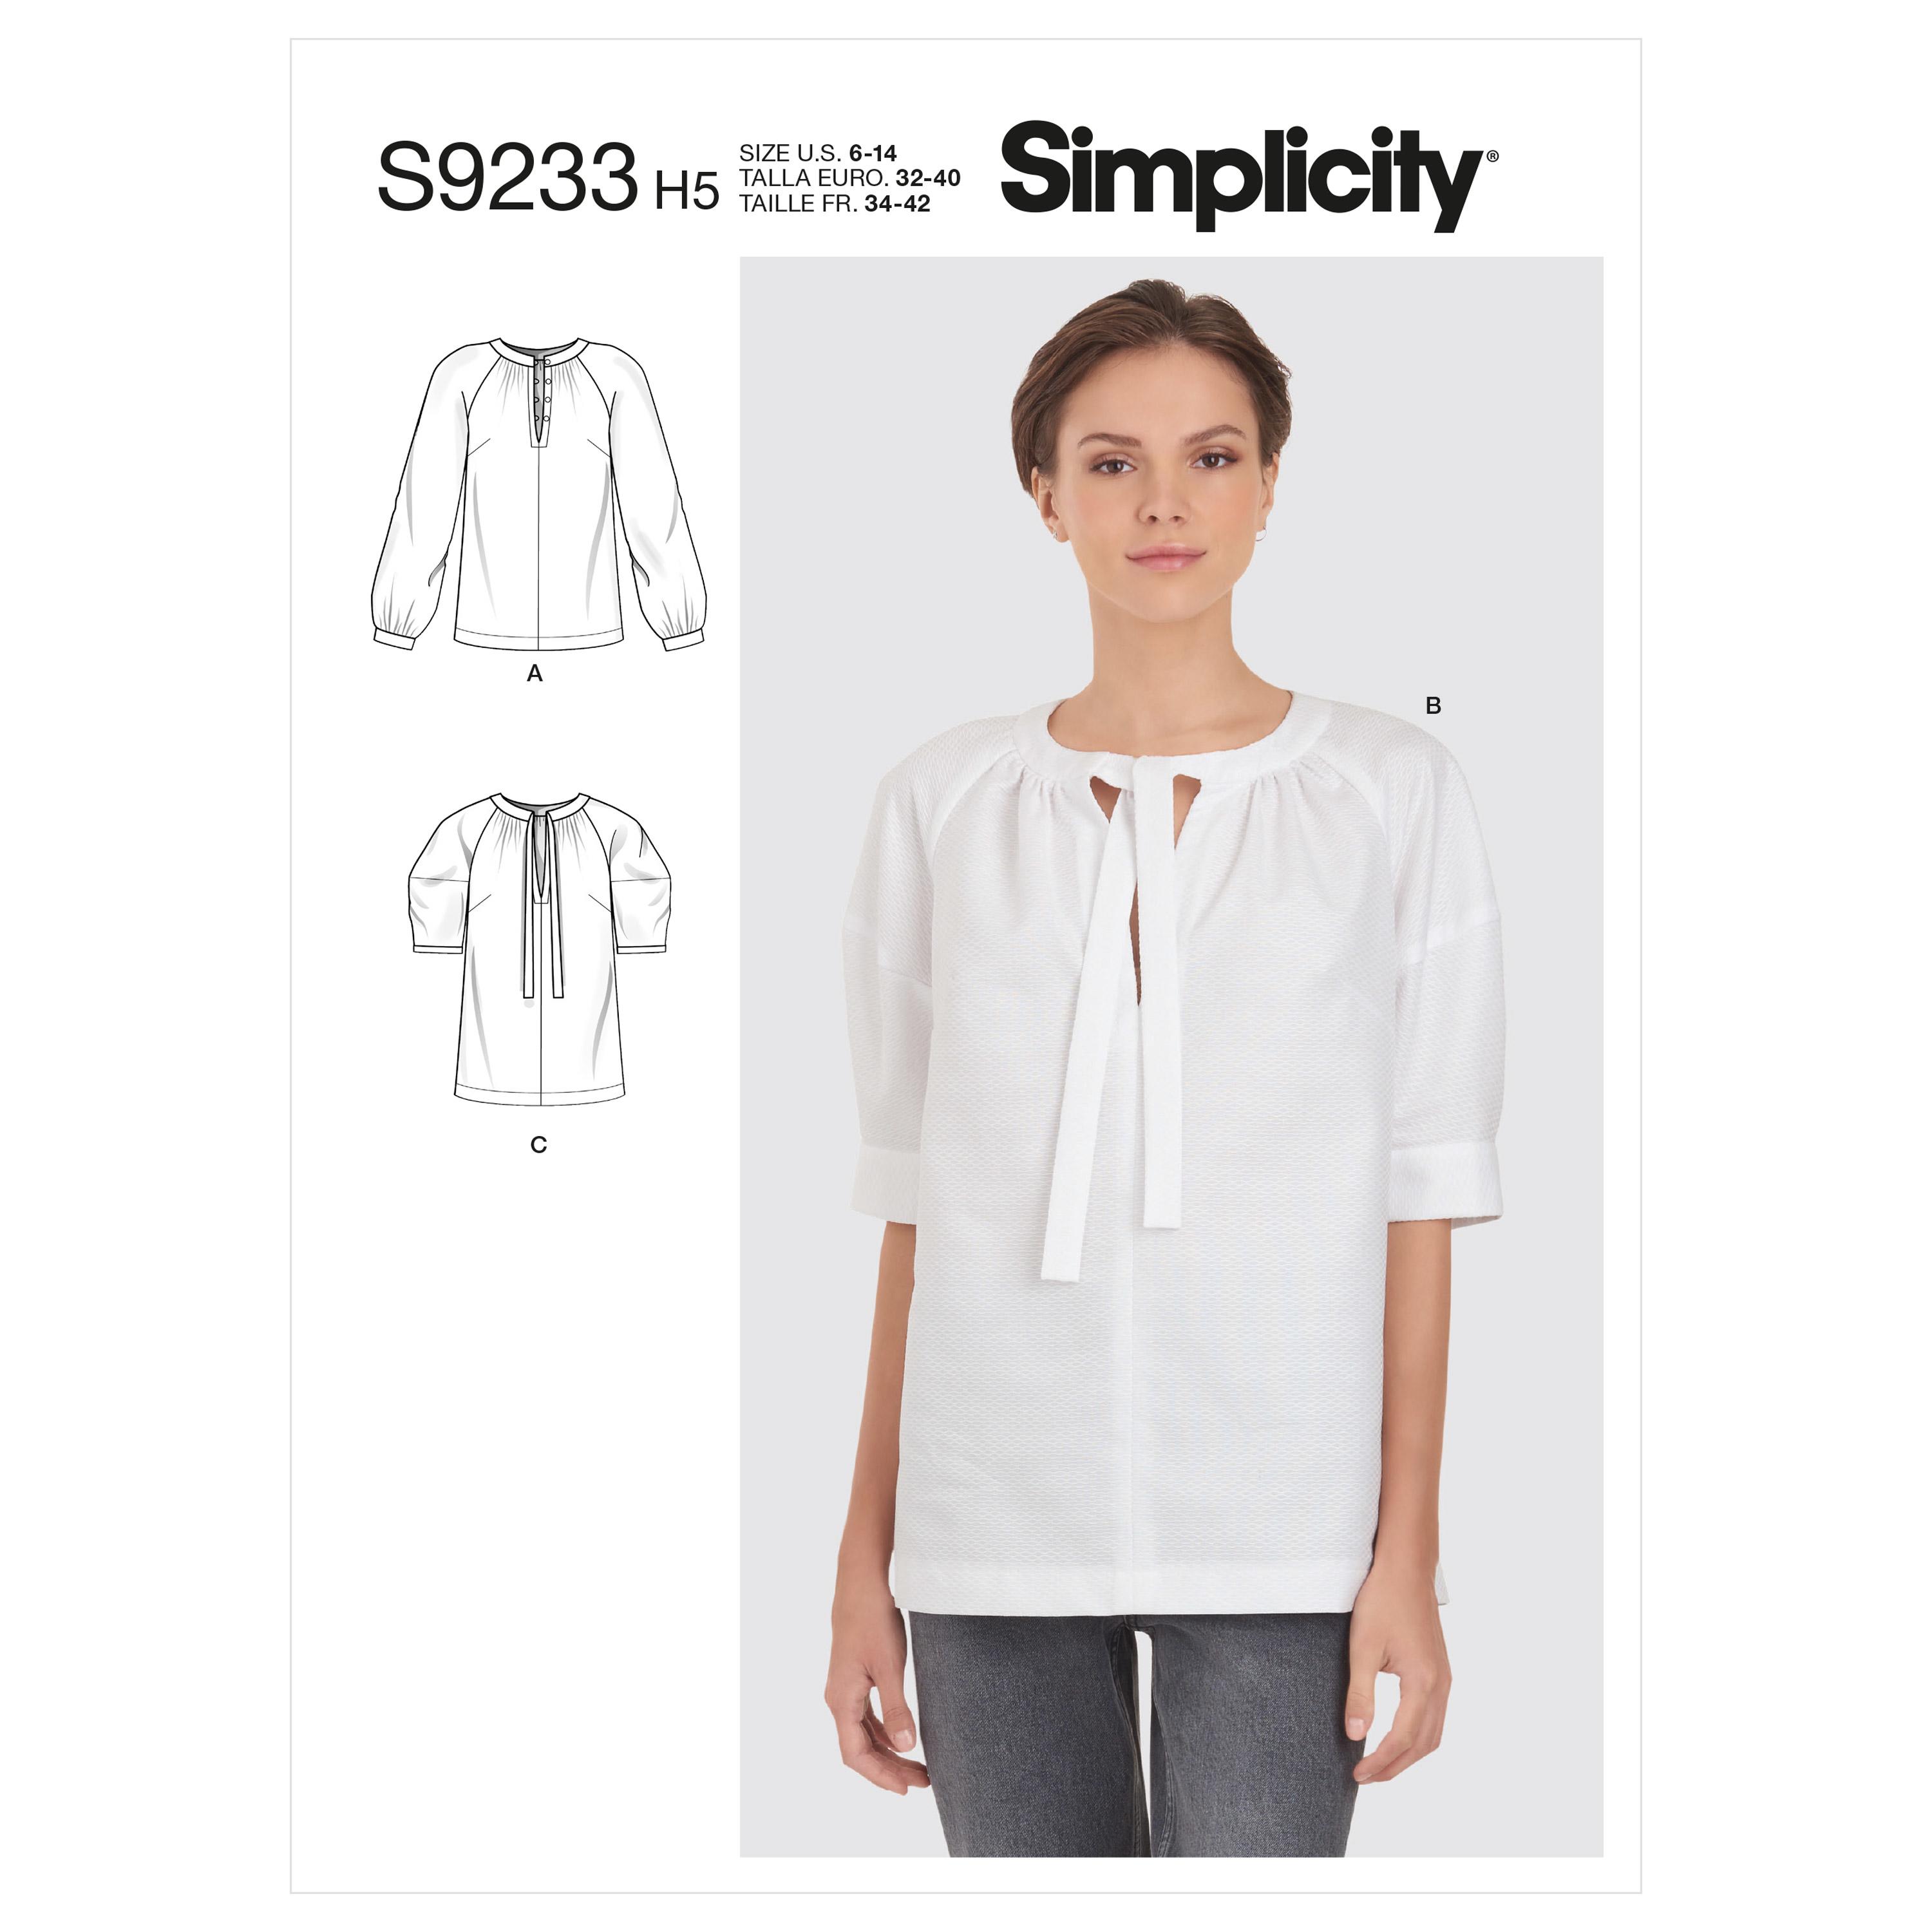 Simplicity Sewing Pattern S9233 Misses' Tops